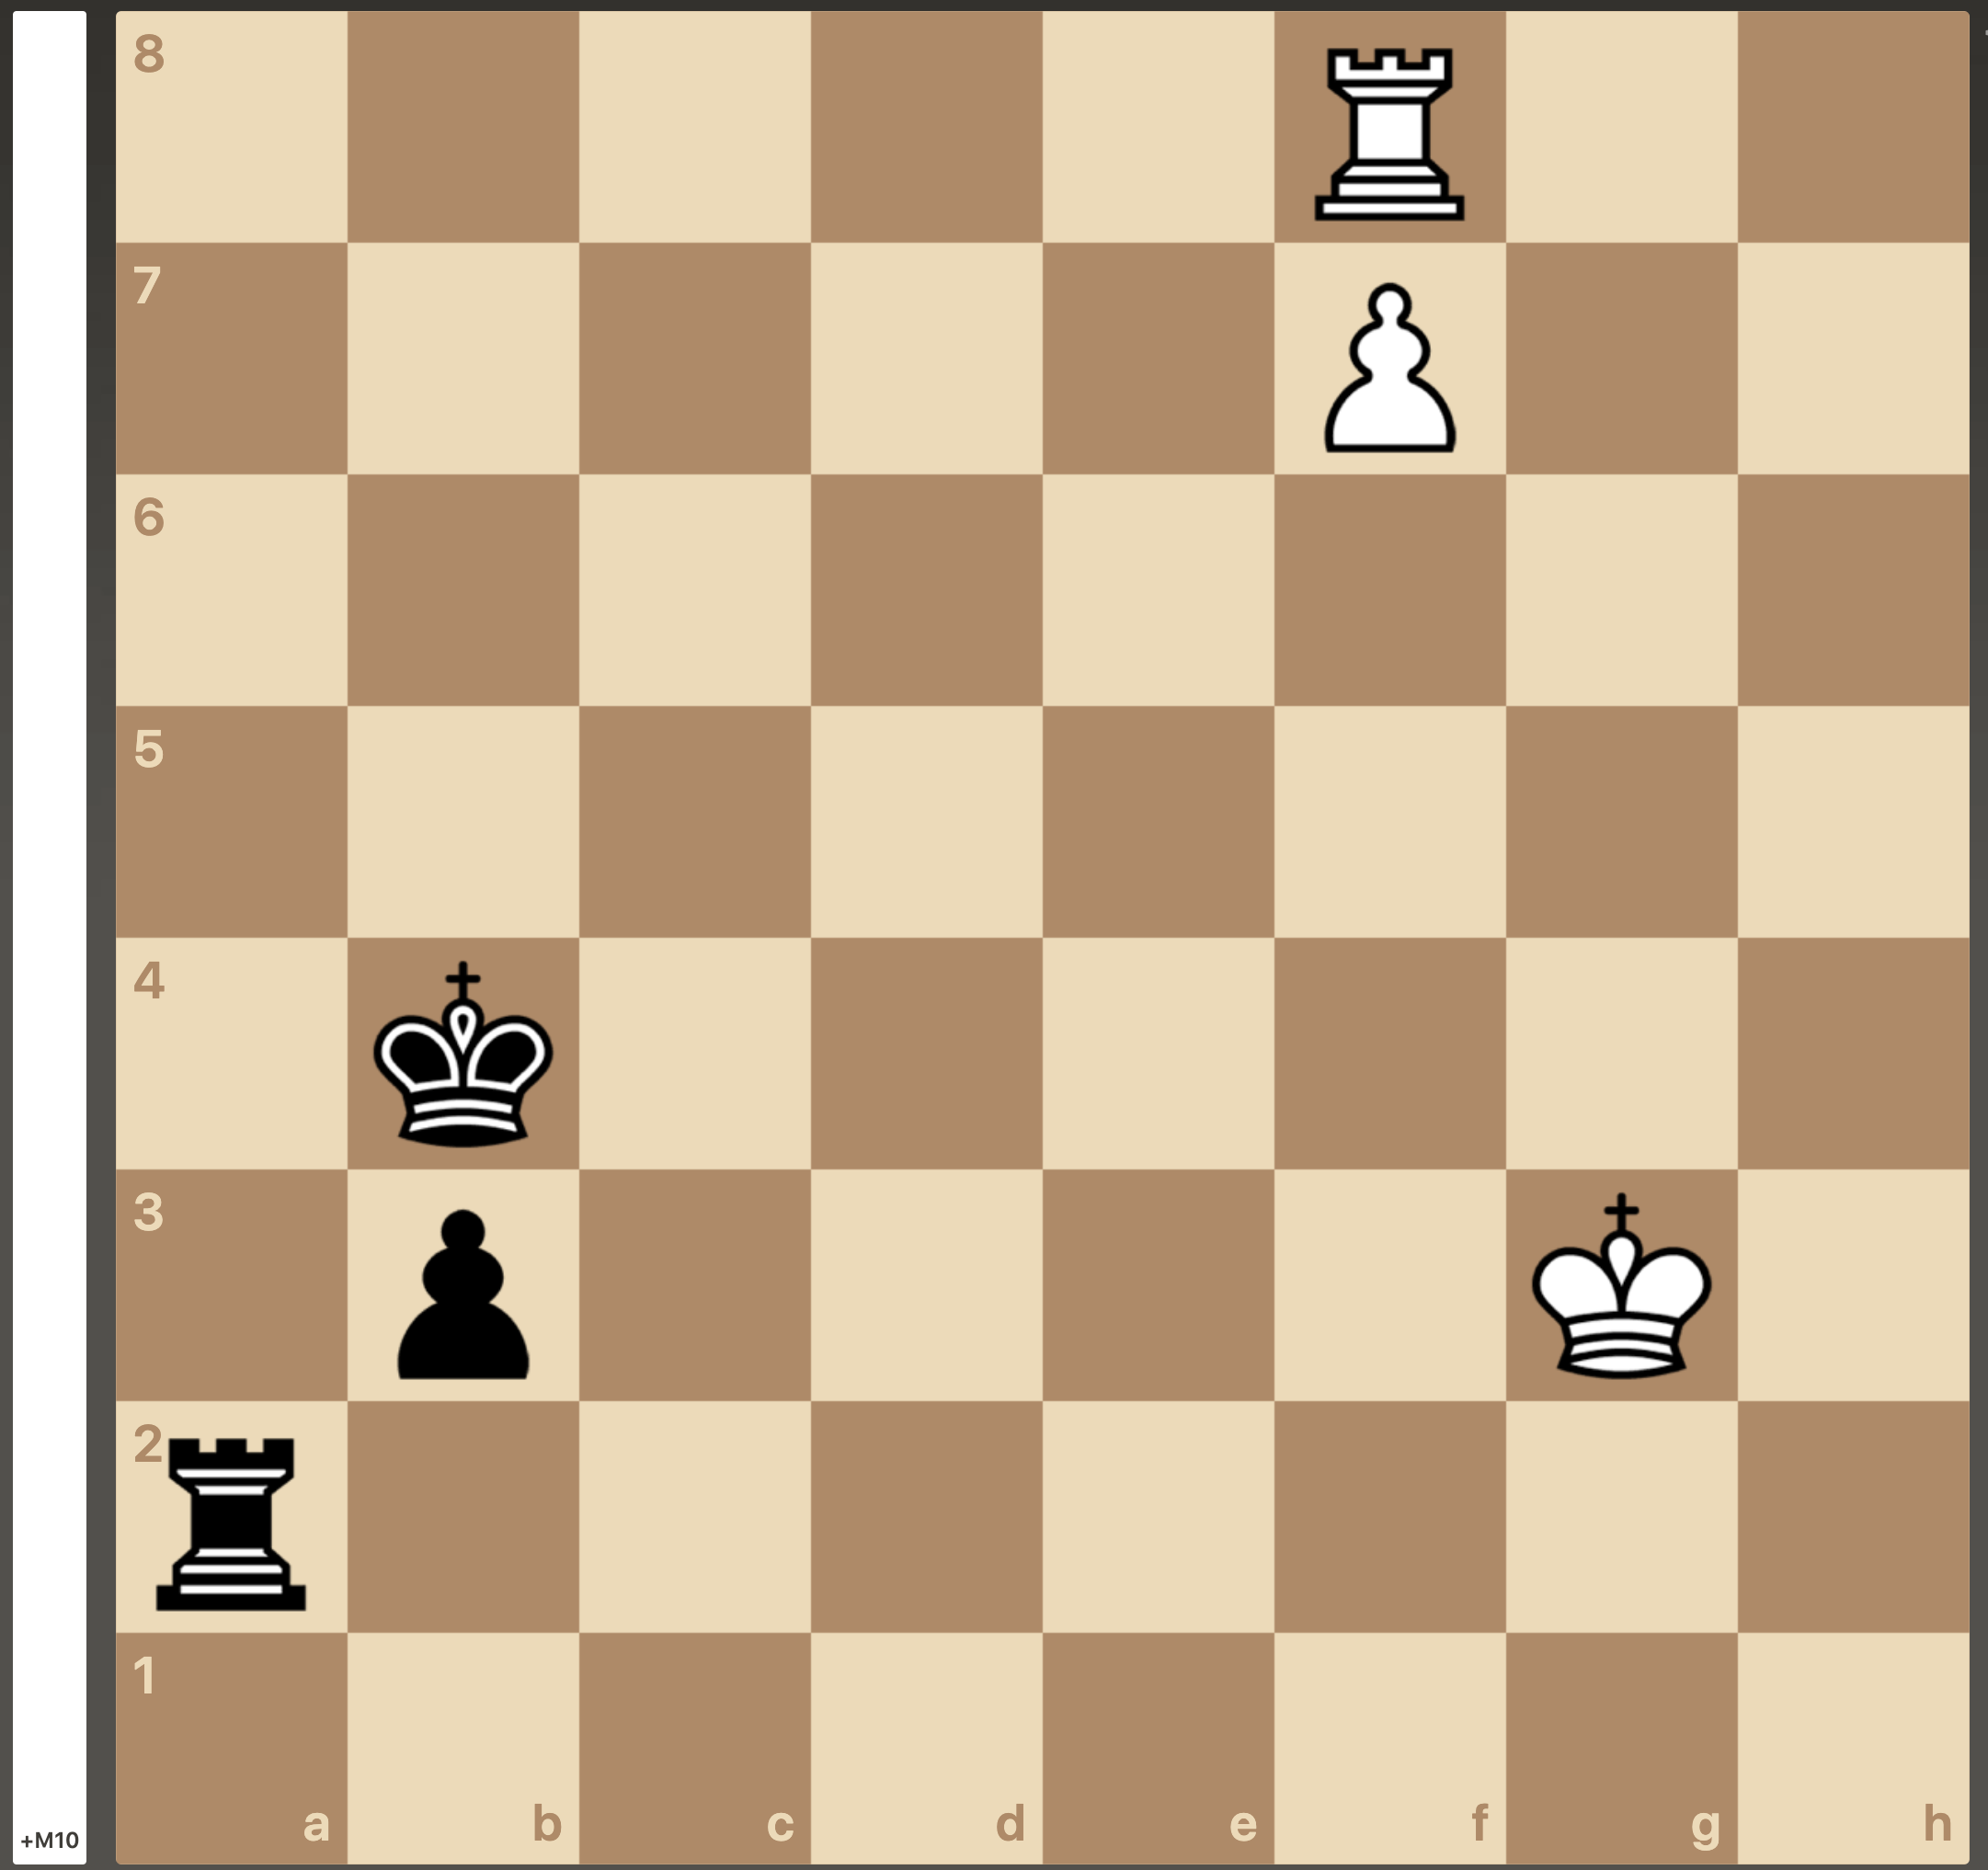 Example of How to Evaluate a Chess Position –